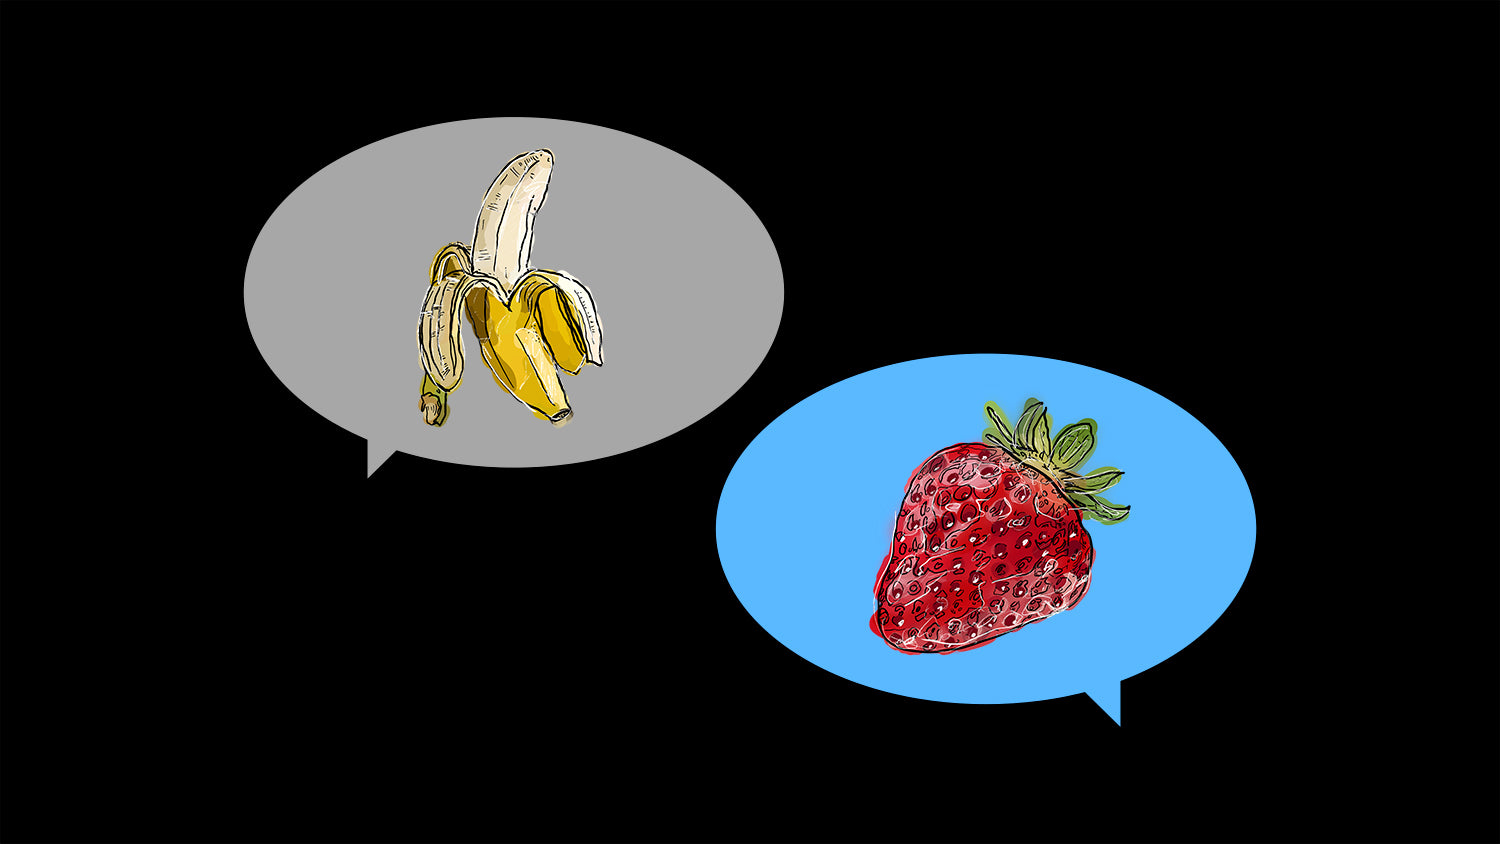 Text bubbles with a banana and strawberry.